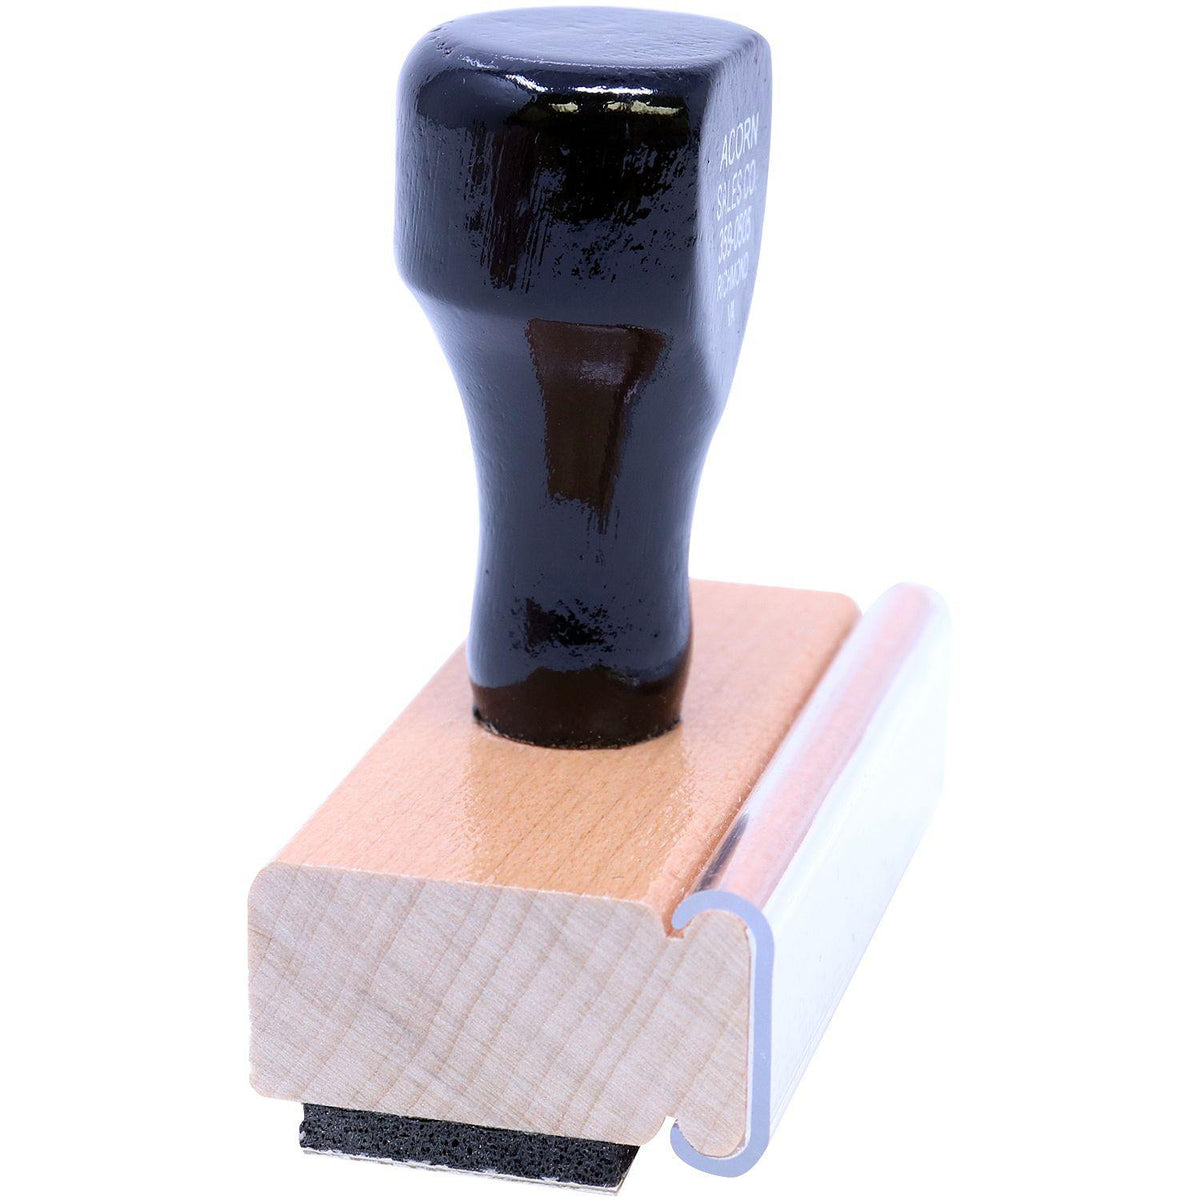 Side View of Large Emailed with Mailbox Rubber Stamp at an Angle